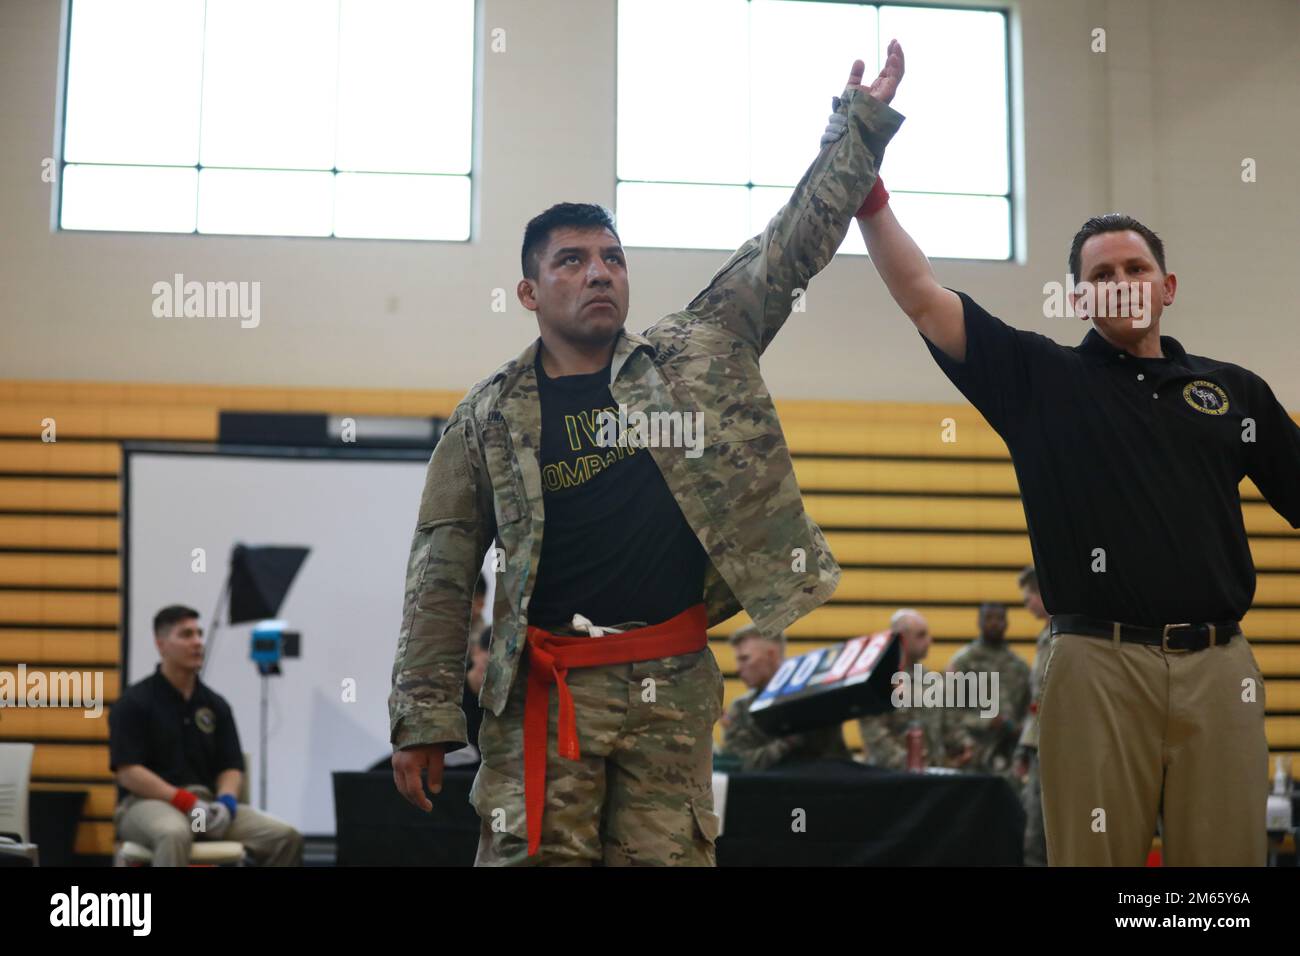 U.S. Army Staff Sgt. Efrain Luna, an aircraft power plant repairer with 404th Aviation Support Battalion, 4th Combat Aviation Brigade, 4th Infantry Division, has his arm raised after defeating his opponent on day 1 of the 2022 All Army Combatives Championship, Lacerda Cup, at Fort Benning, Georgia, April 5. The combatives competition is named in honor of the late Staff. Sgt. Pedro Lacerda of the 75th Ranger Regiment, and recognizes outstanding performance in hand-to-hand fighting skills known in the Army as combatives. Stock Photo